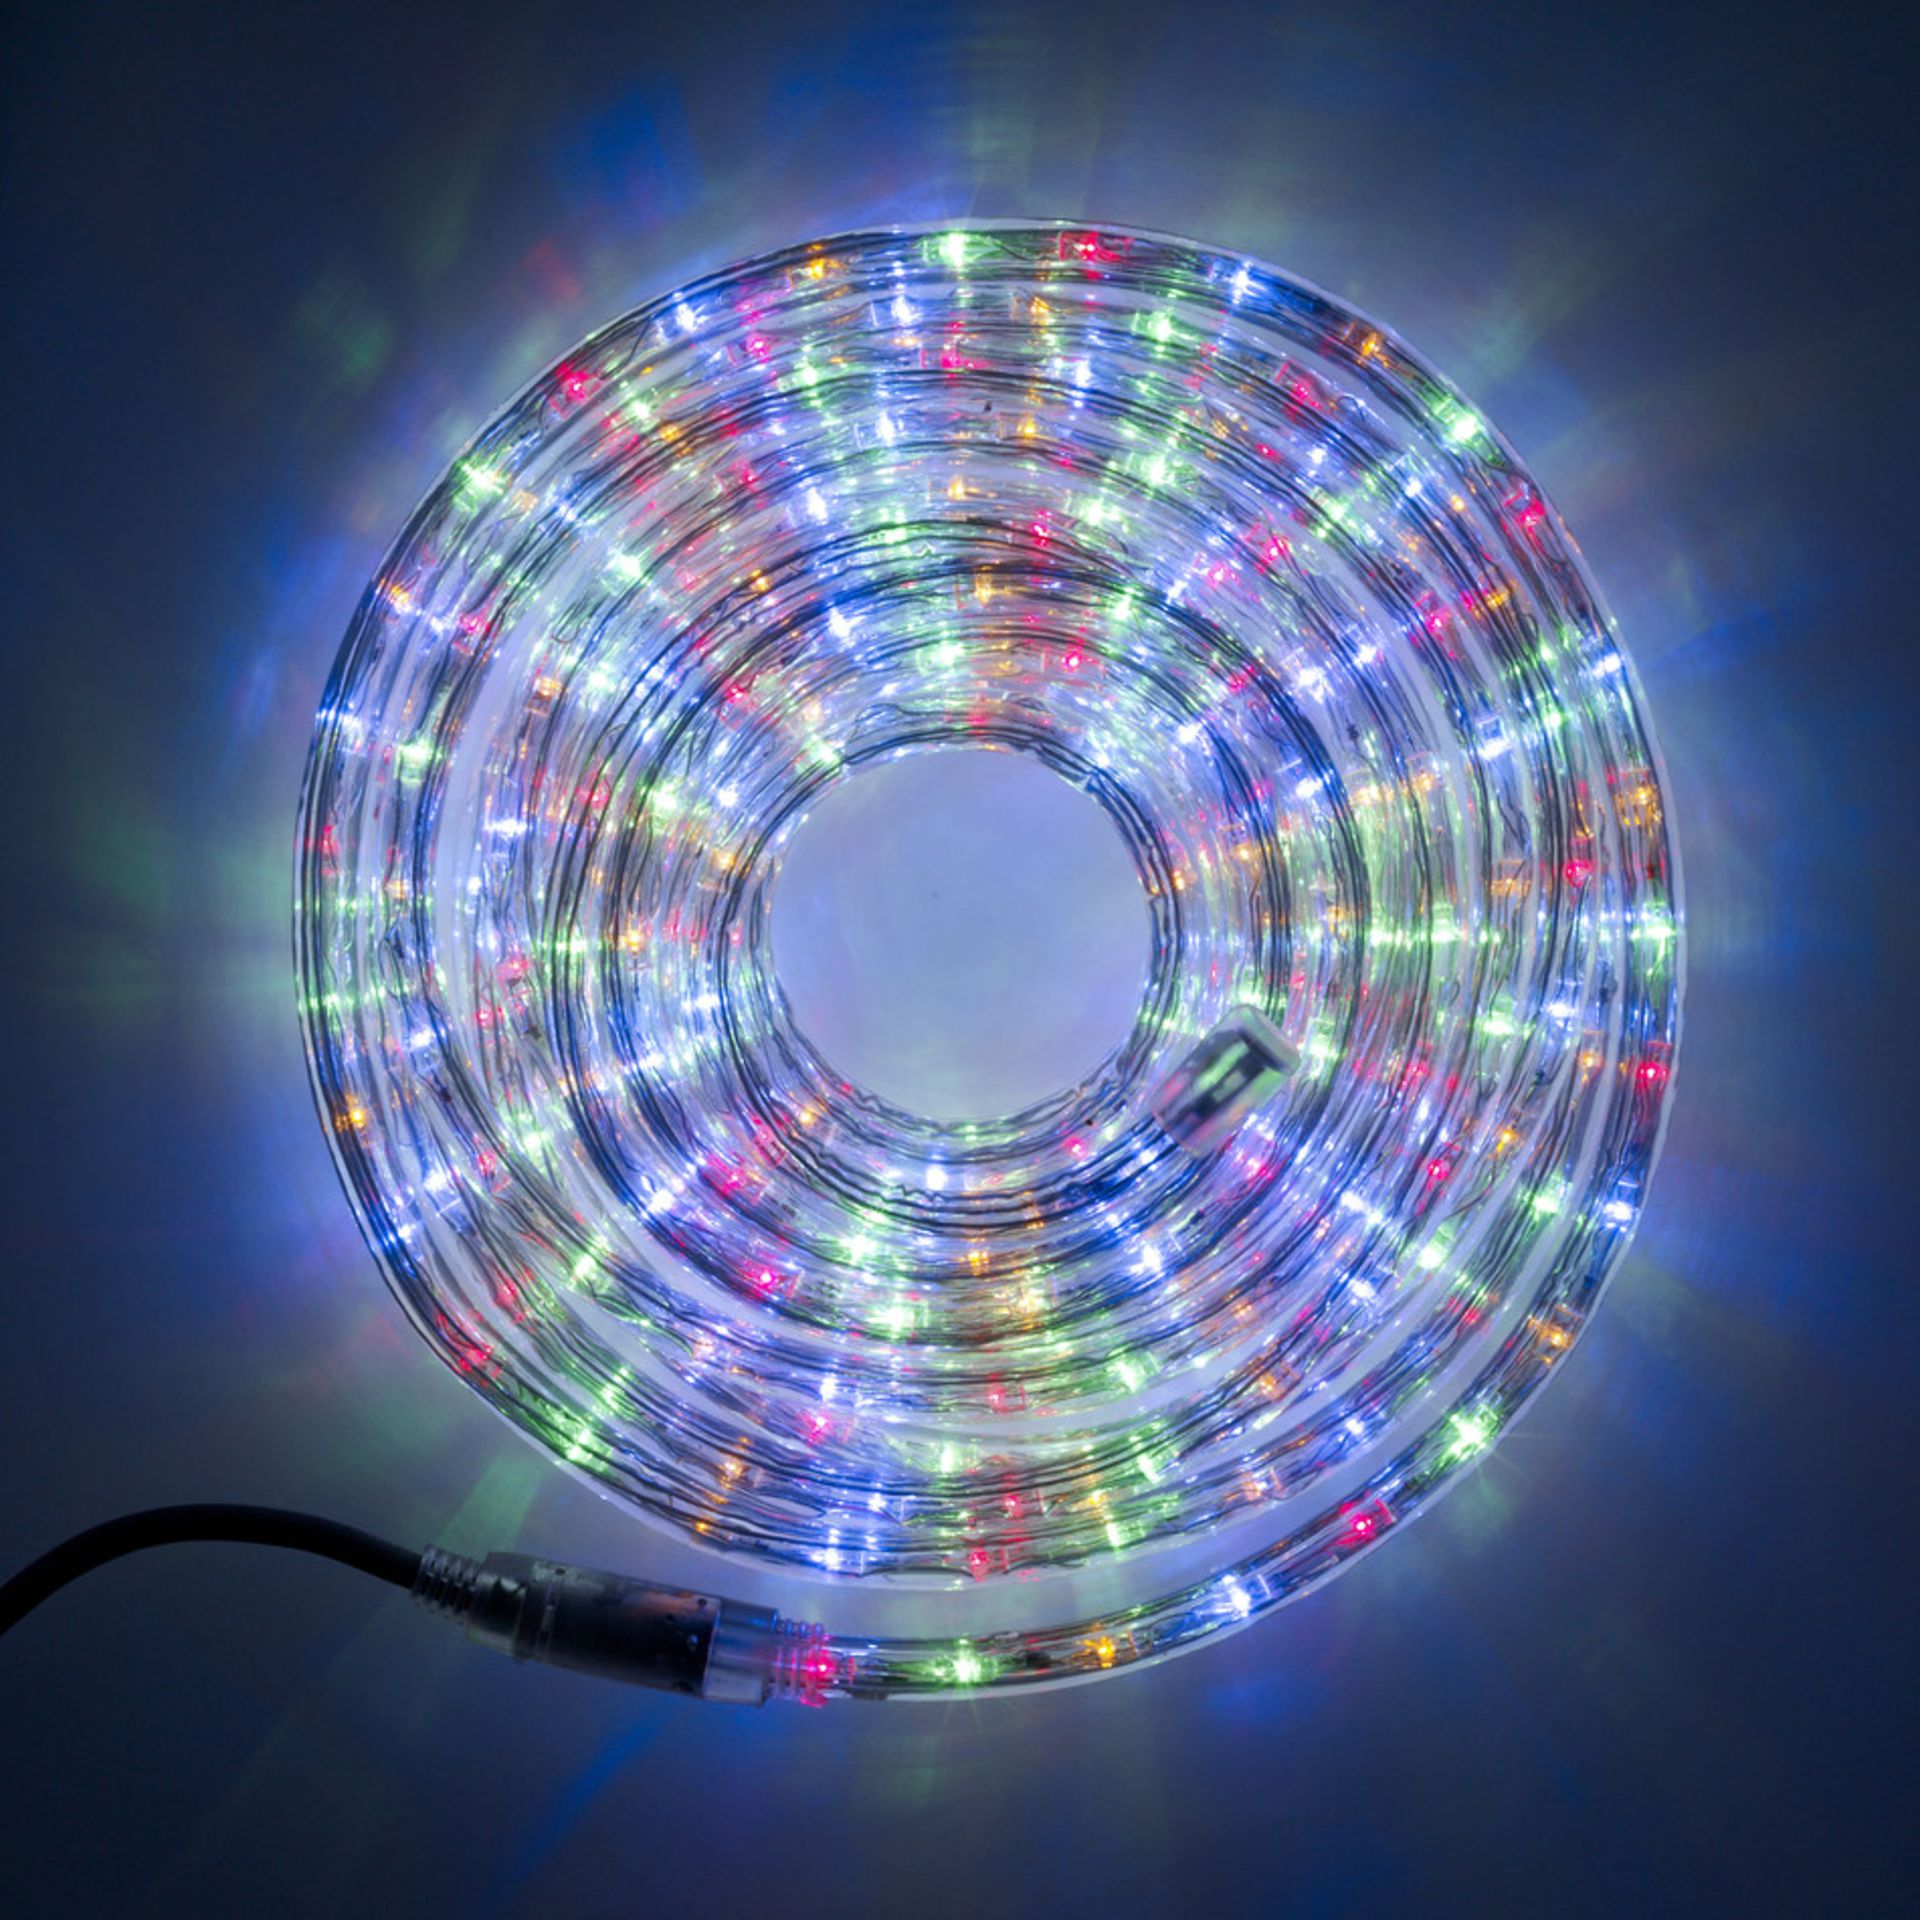 V Brand New 5M Multi-Coloured LED Rope Light - 8 Functions - Indoor & Outdoor Use - Online Price £